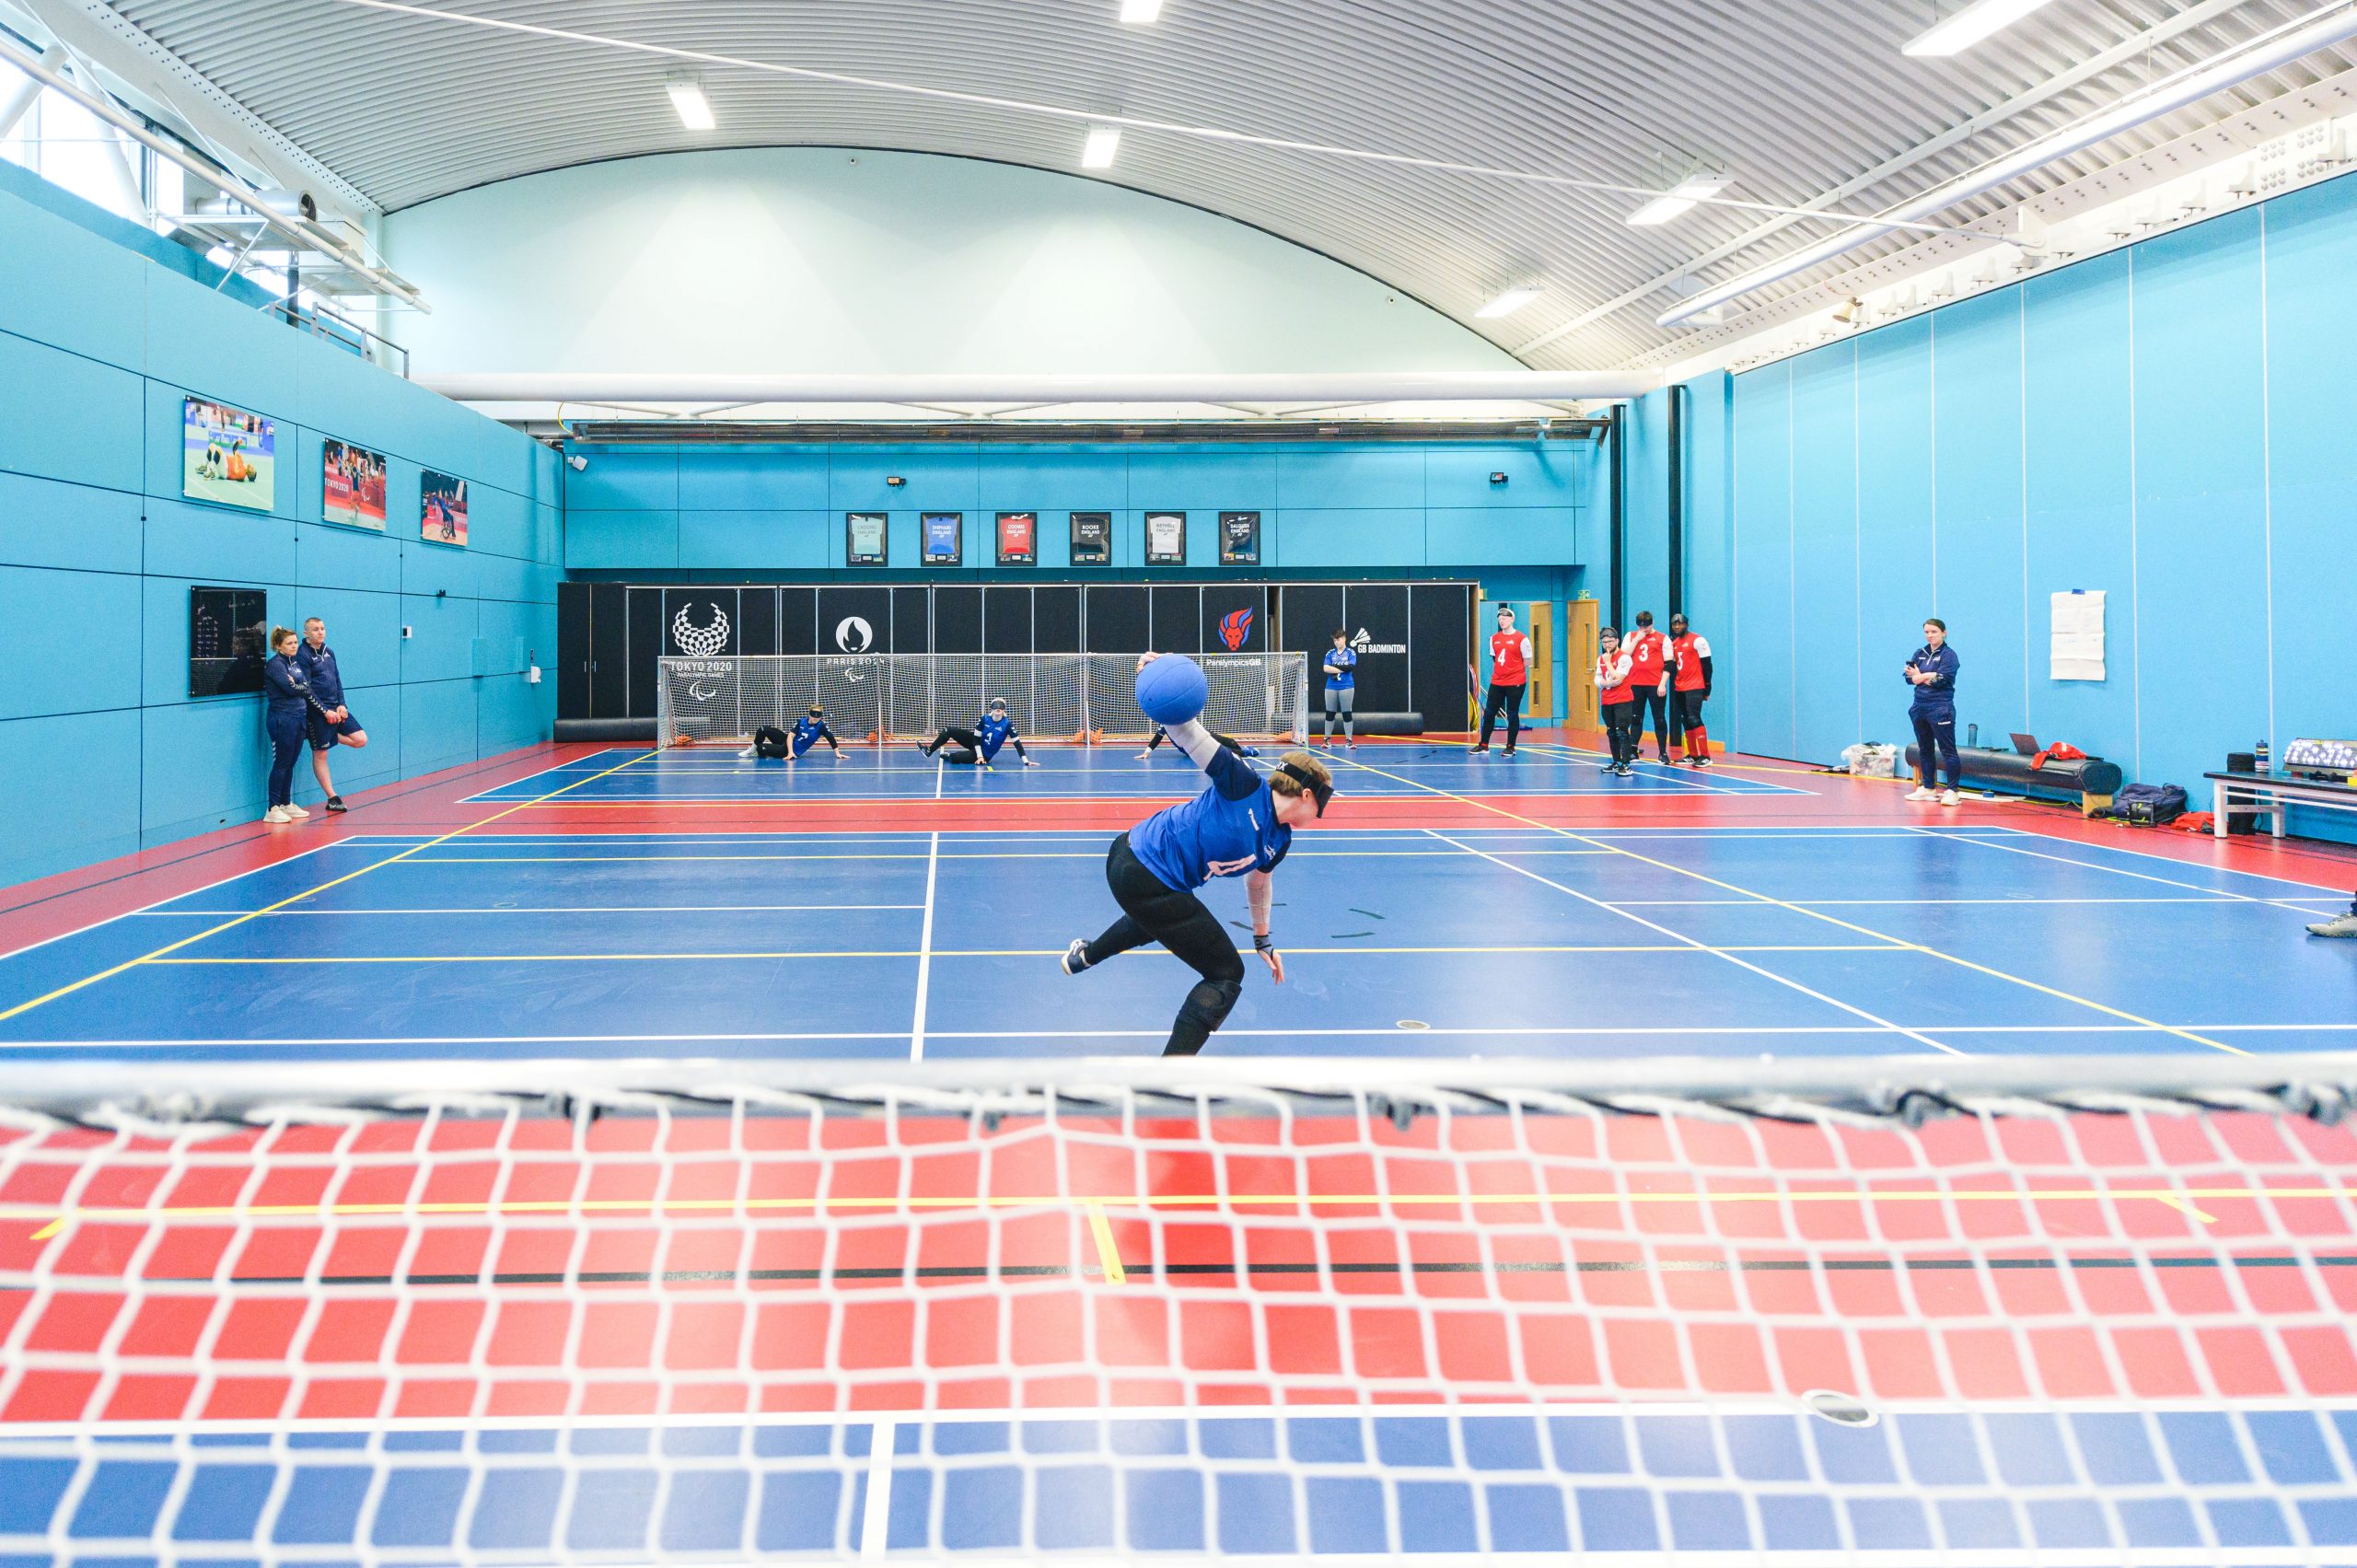 A female GB goalball player is centre of the court, with her arm drawn back ready to throw the ball